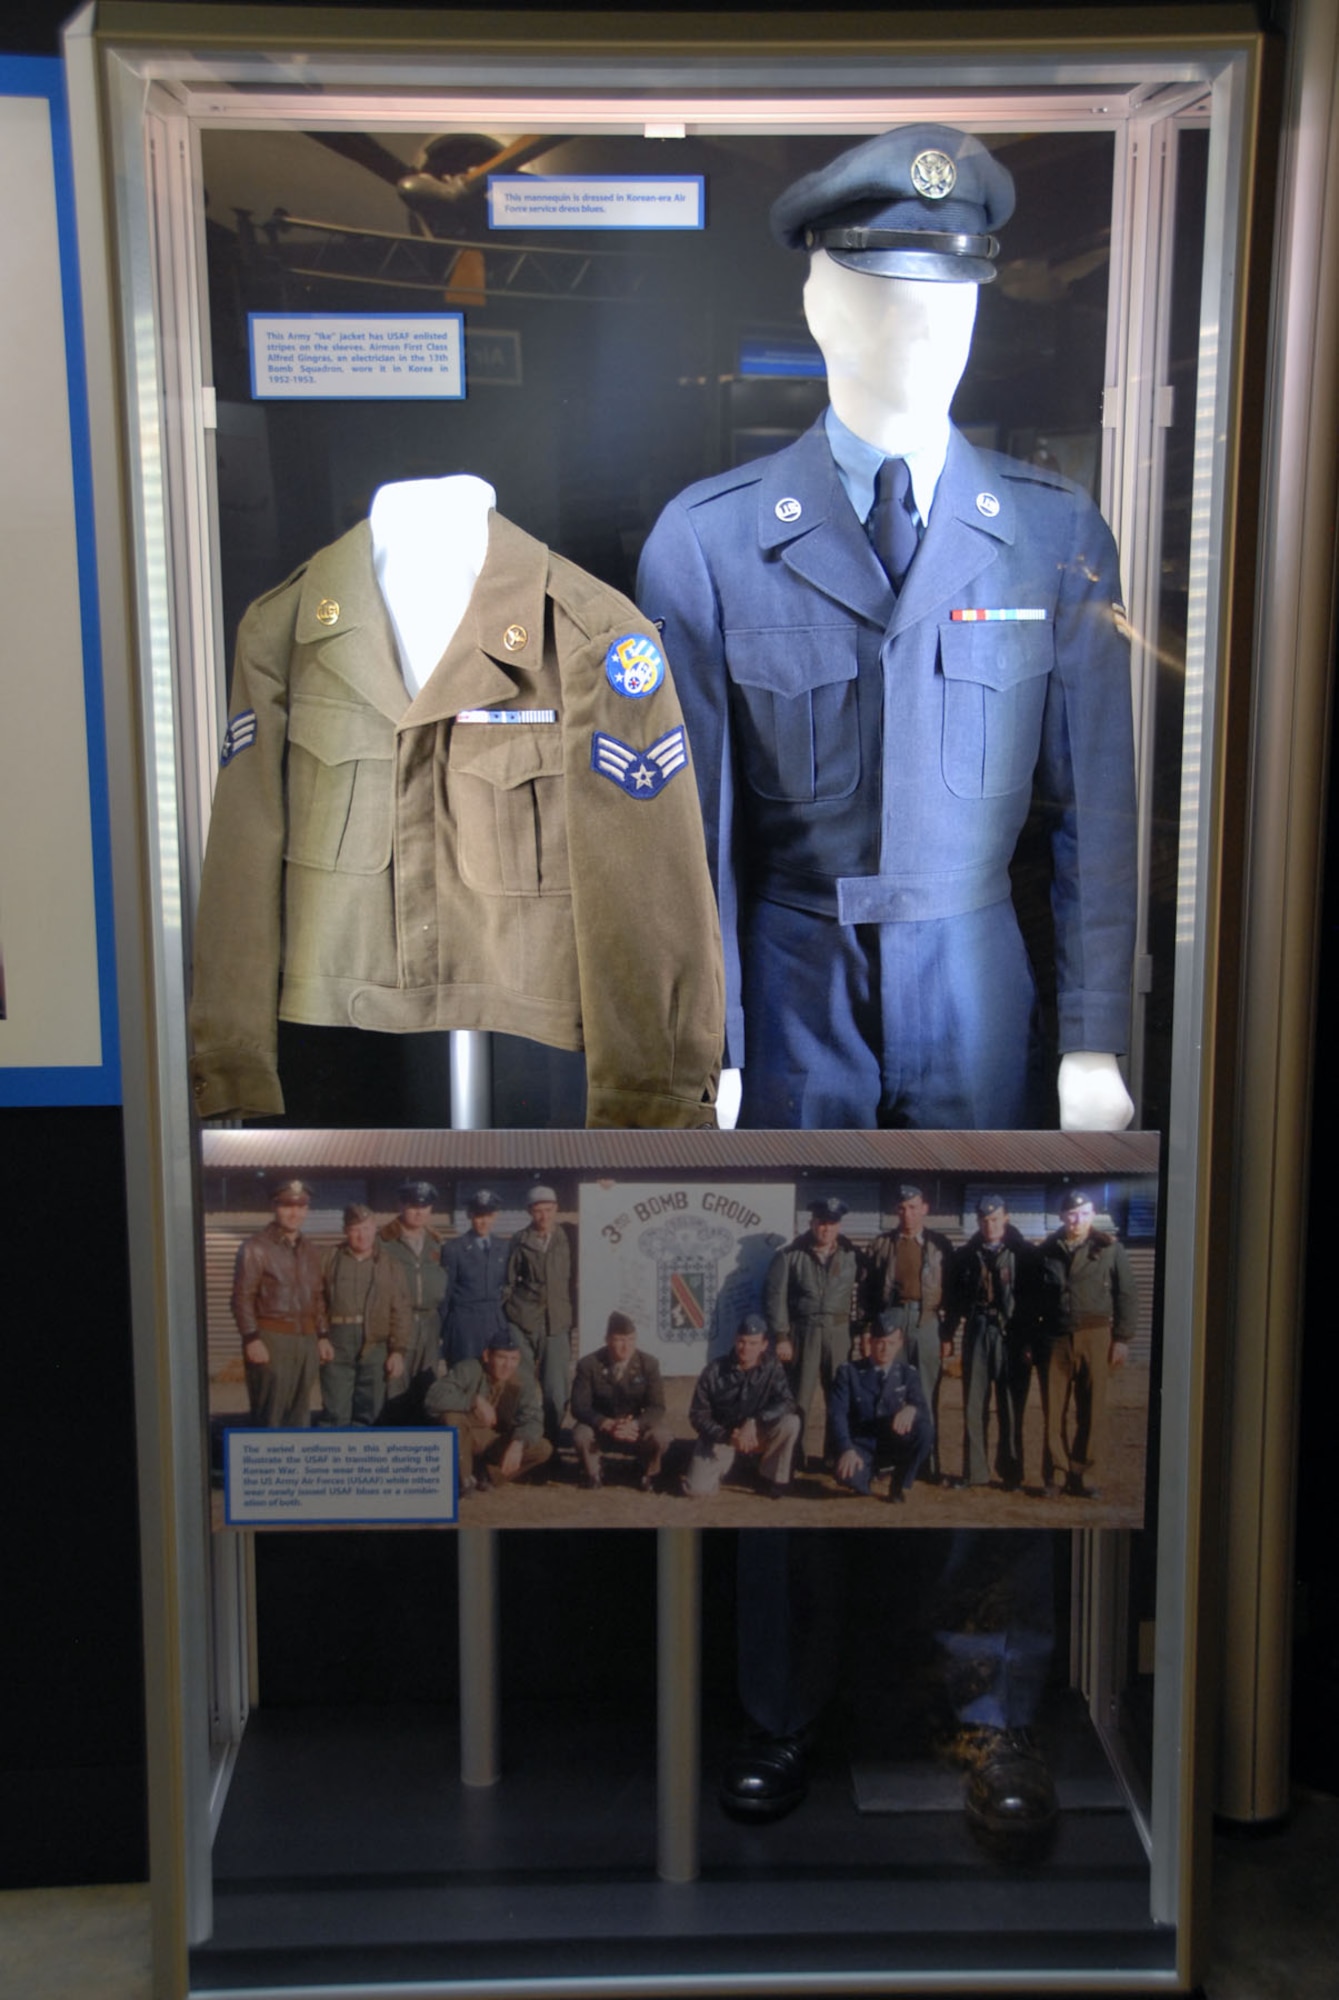 DAYTON, Ohio -- "Army Green to Air Force Blue" exhibit in the Korean War Gallery at the National Museum of the United States Air Force. (U.S. Air Force photo)